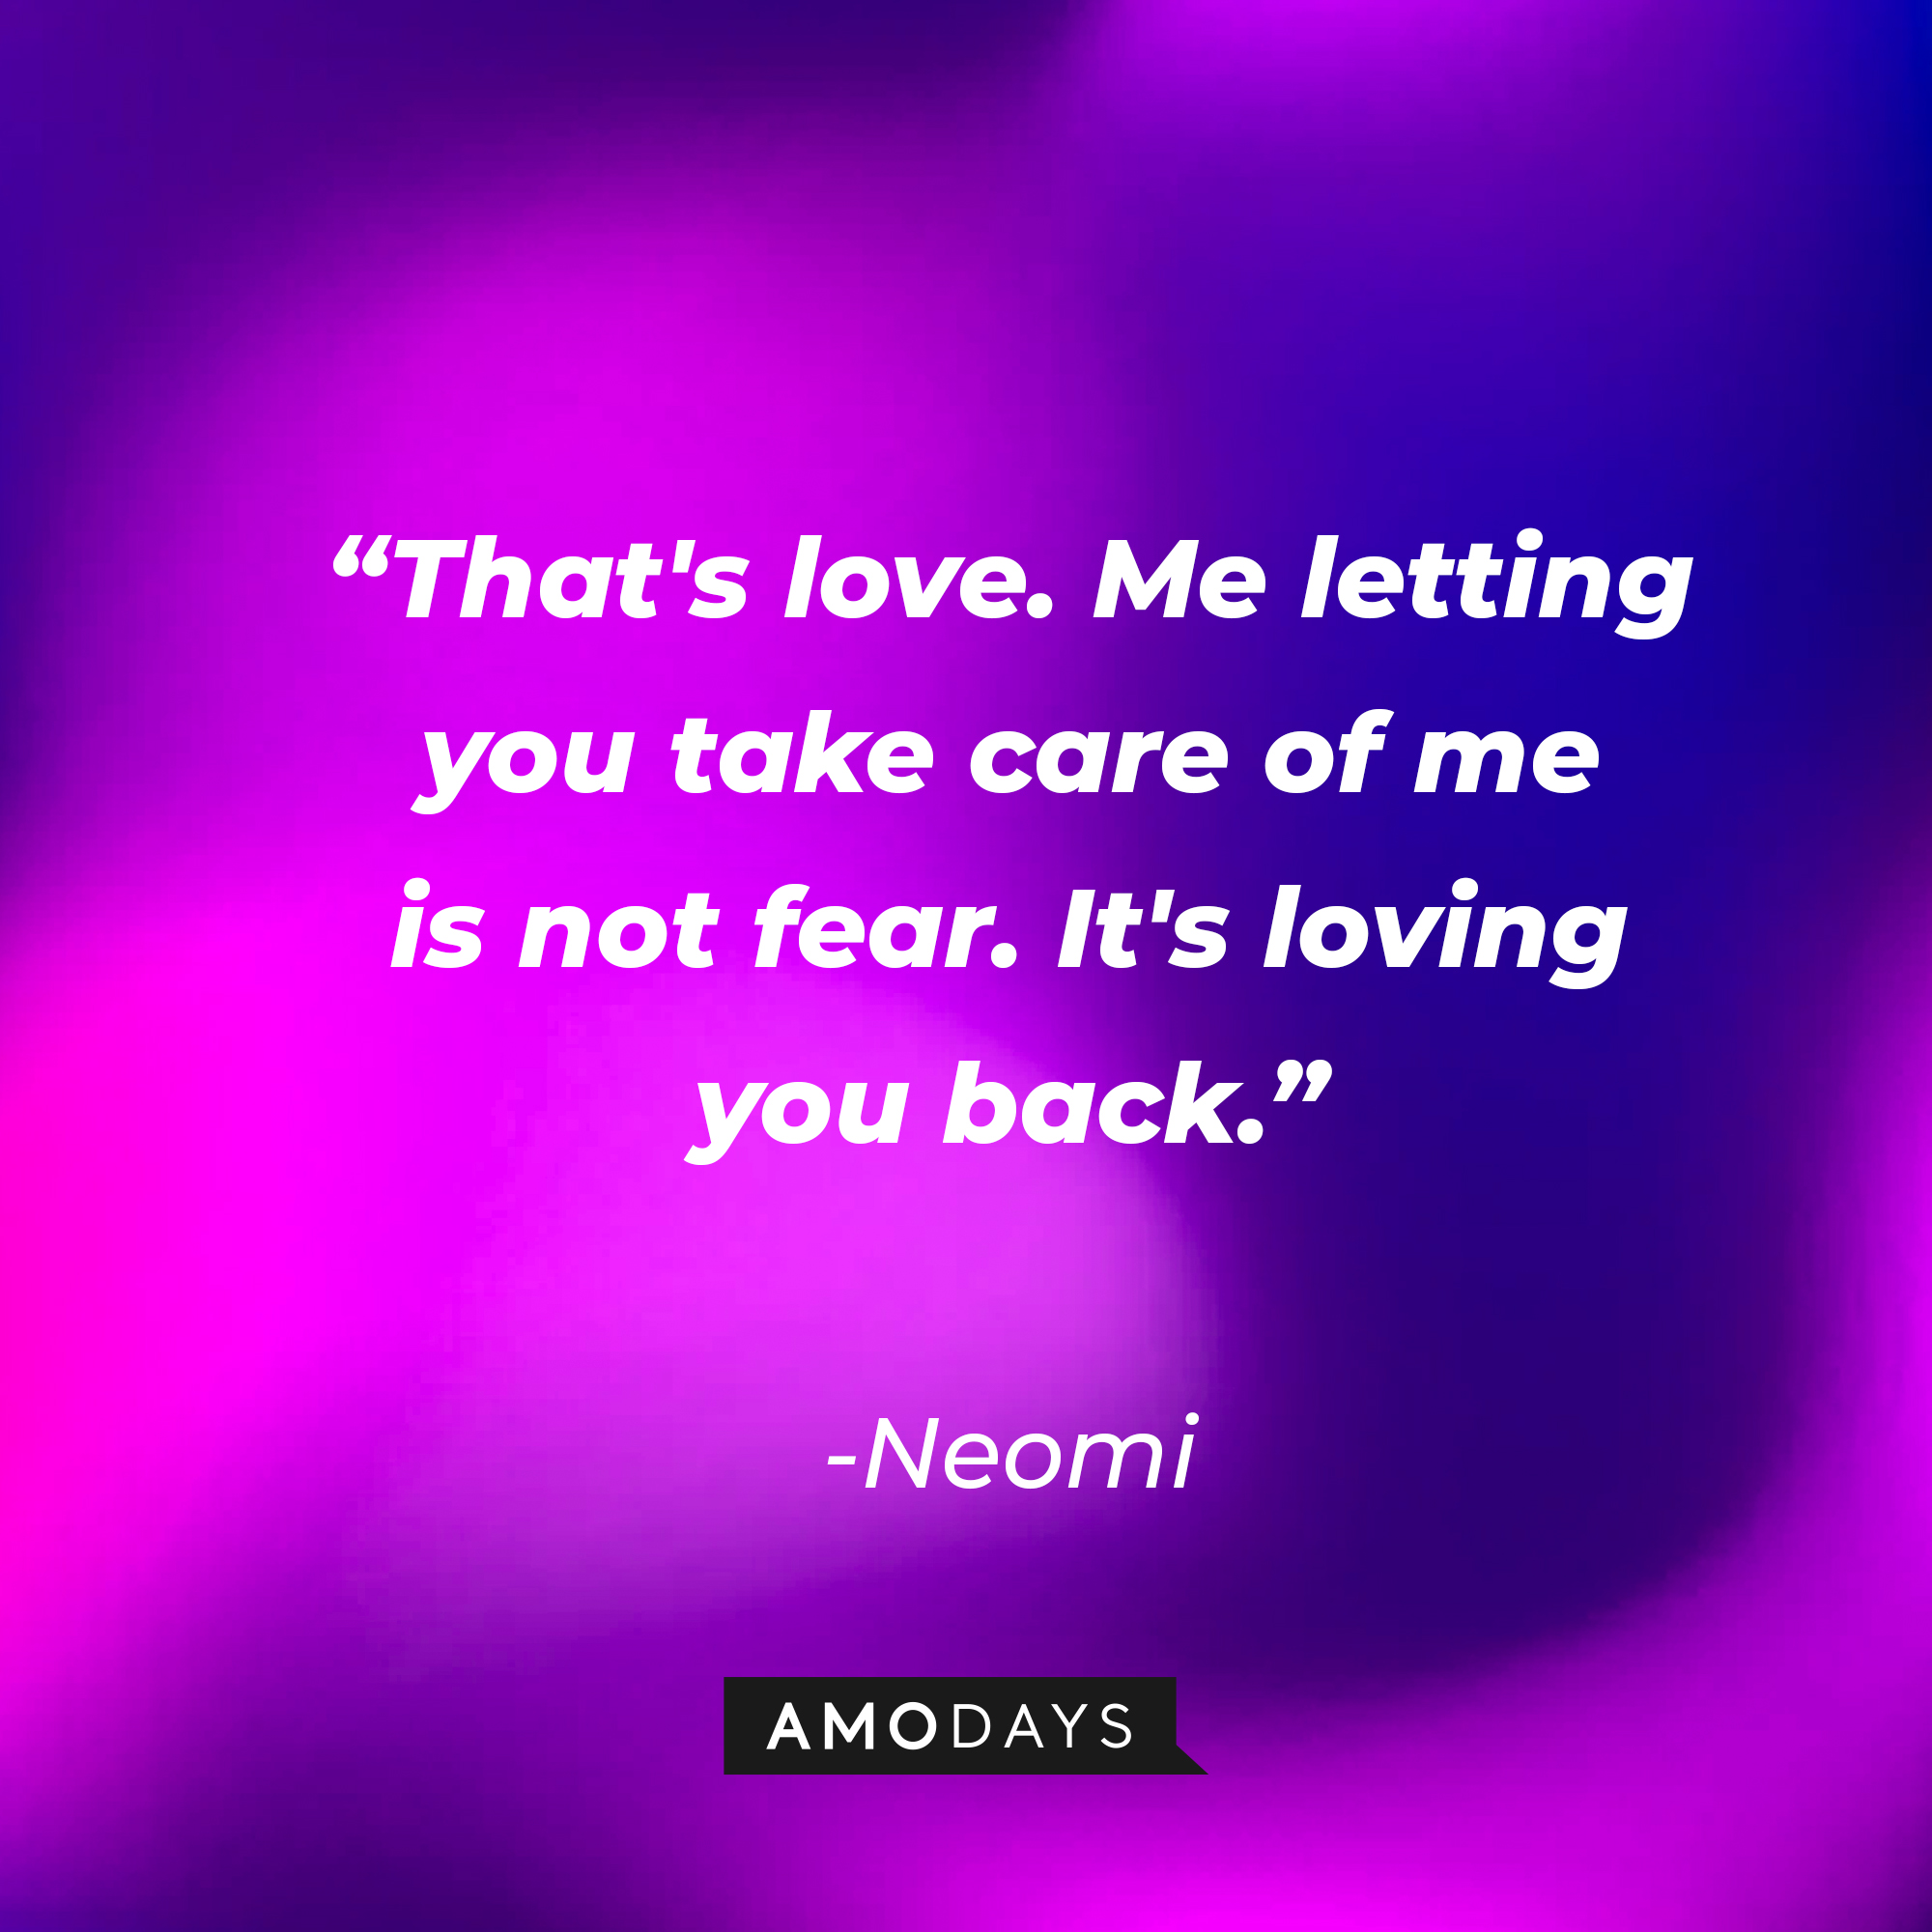 Neomi’s quote: “That's love. Me letting you take care of me is not fear. It's loving you back.” | Source: AmoDays